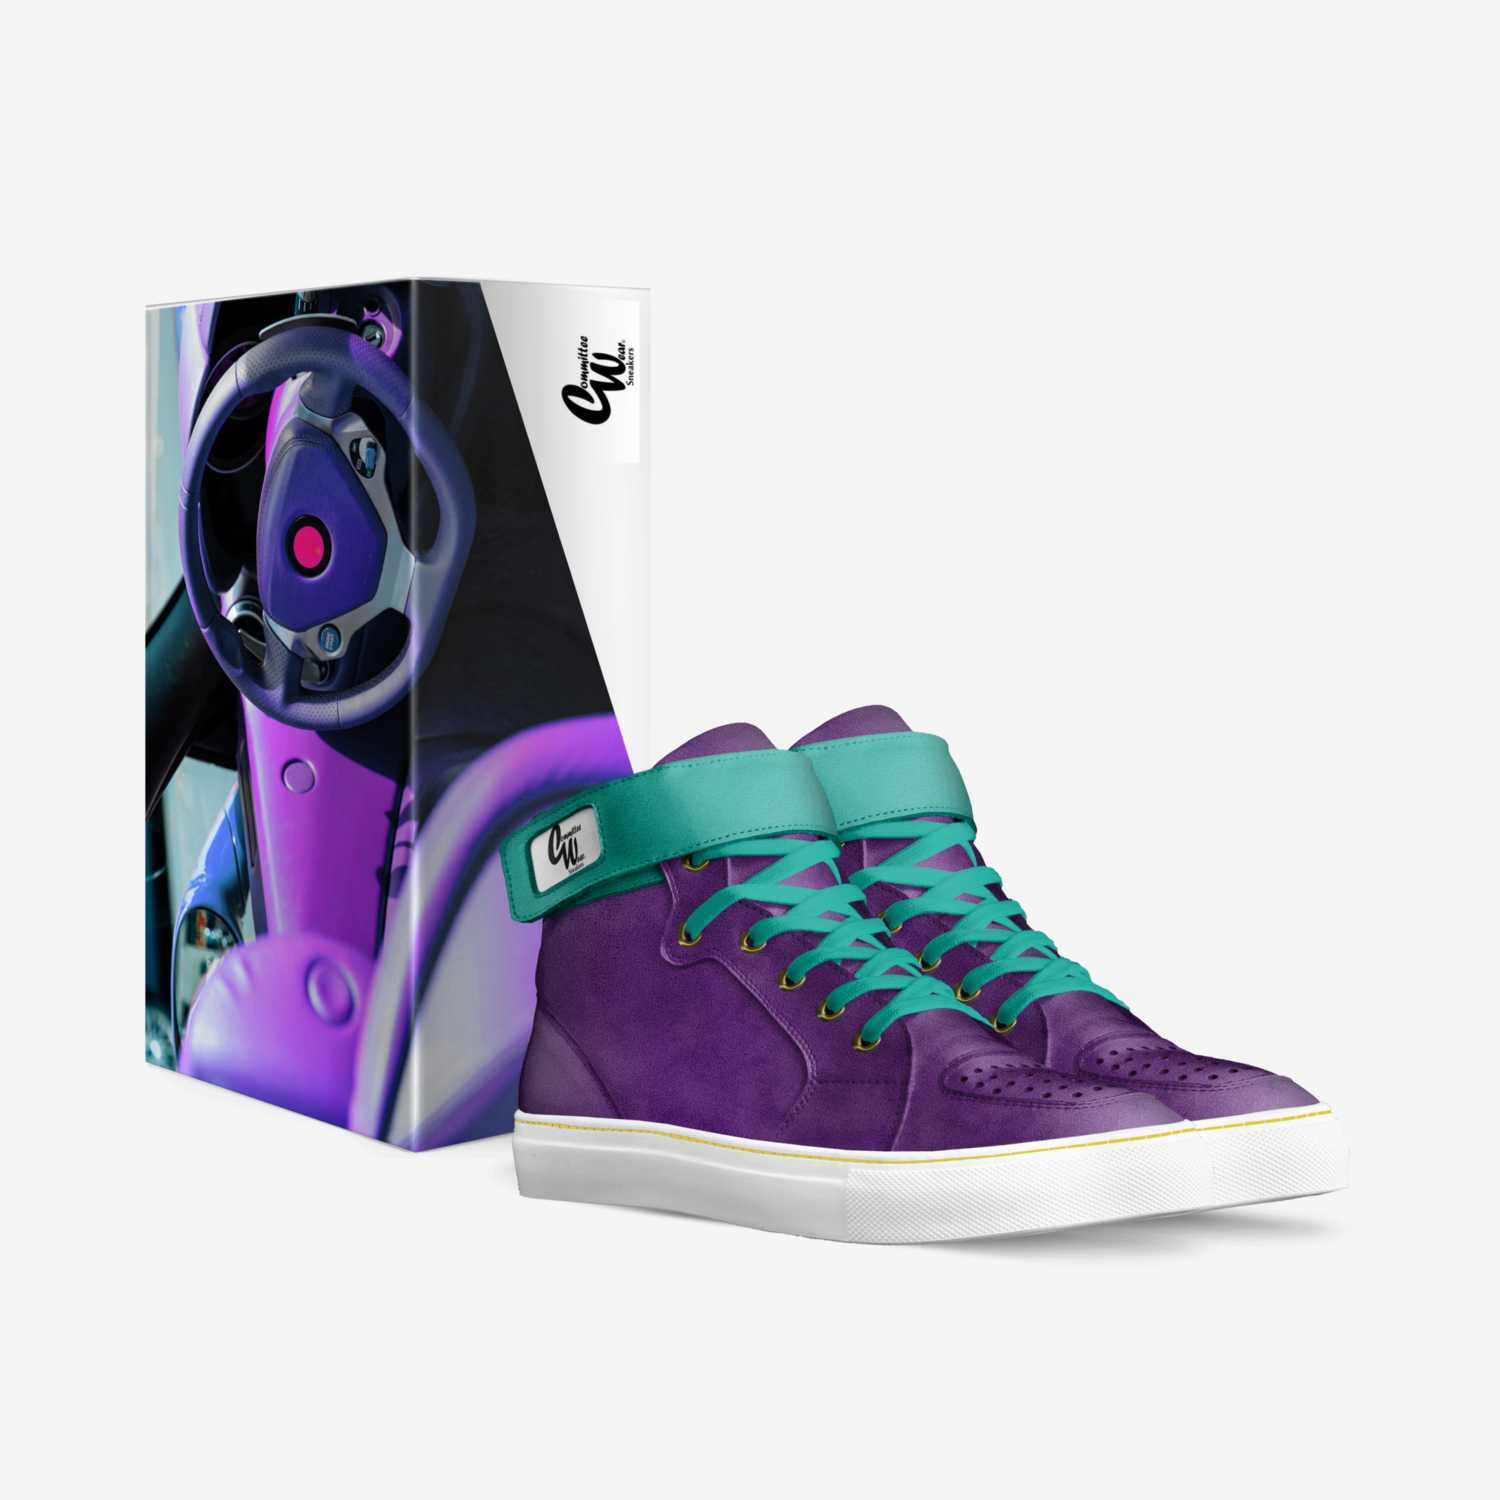 CW PURPLE CITY custom made in Italy shoes by Terrence Ford | Box view